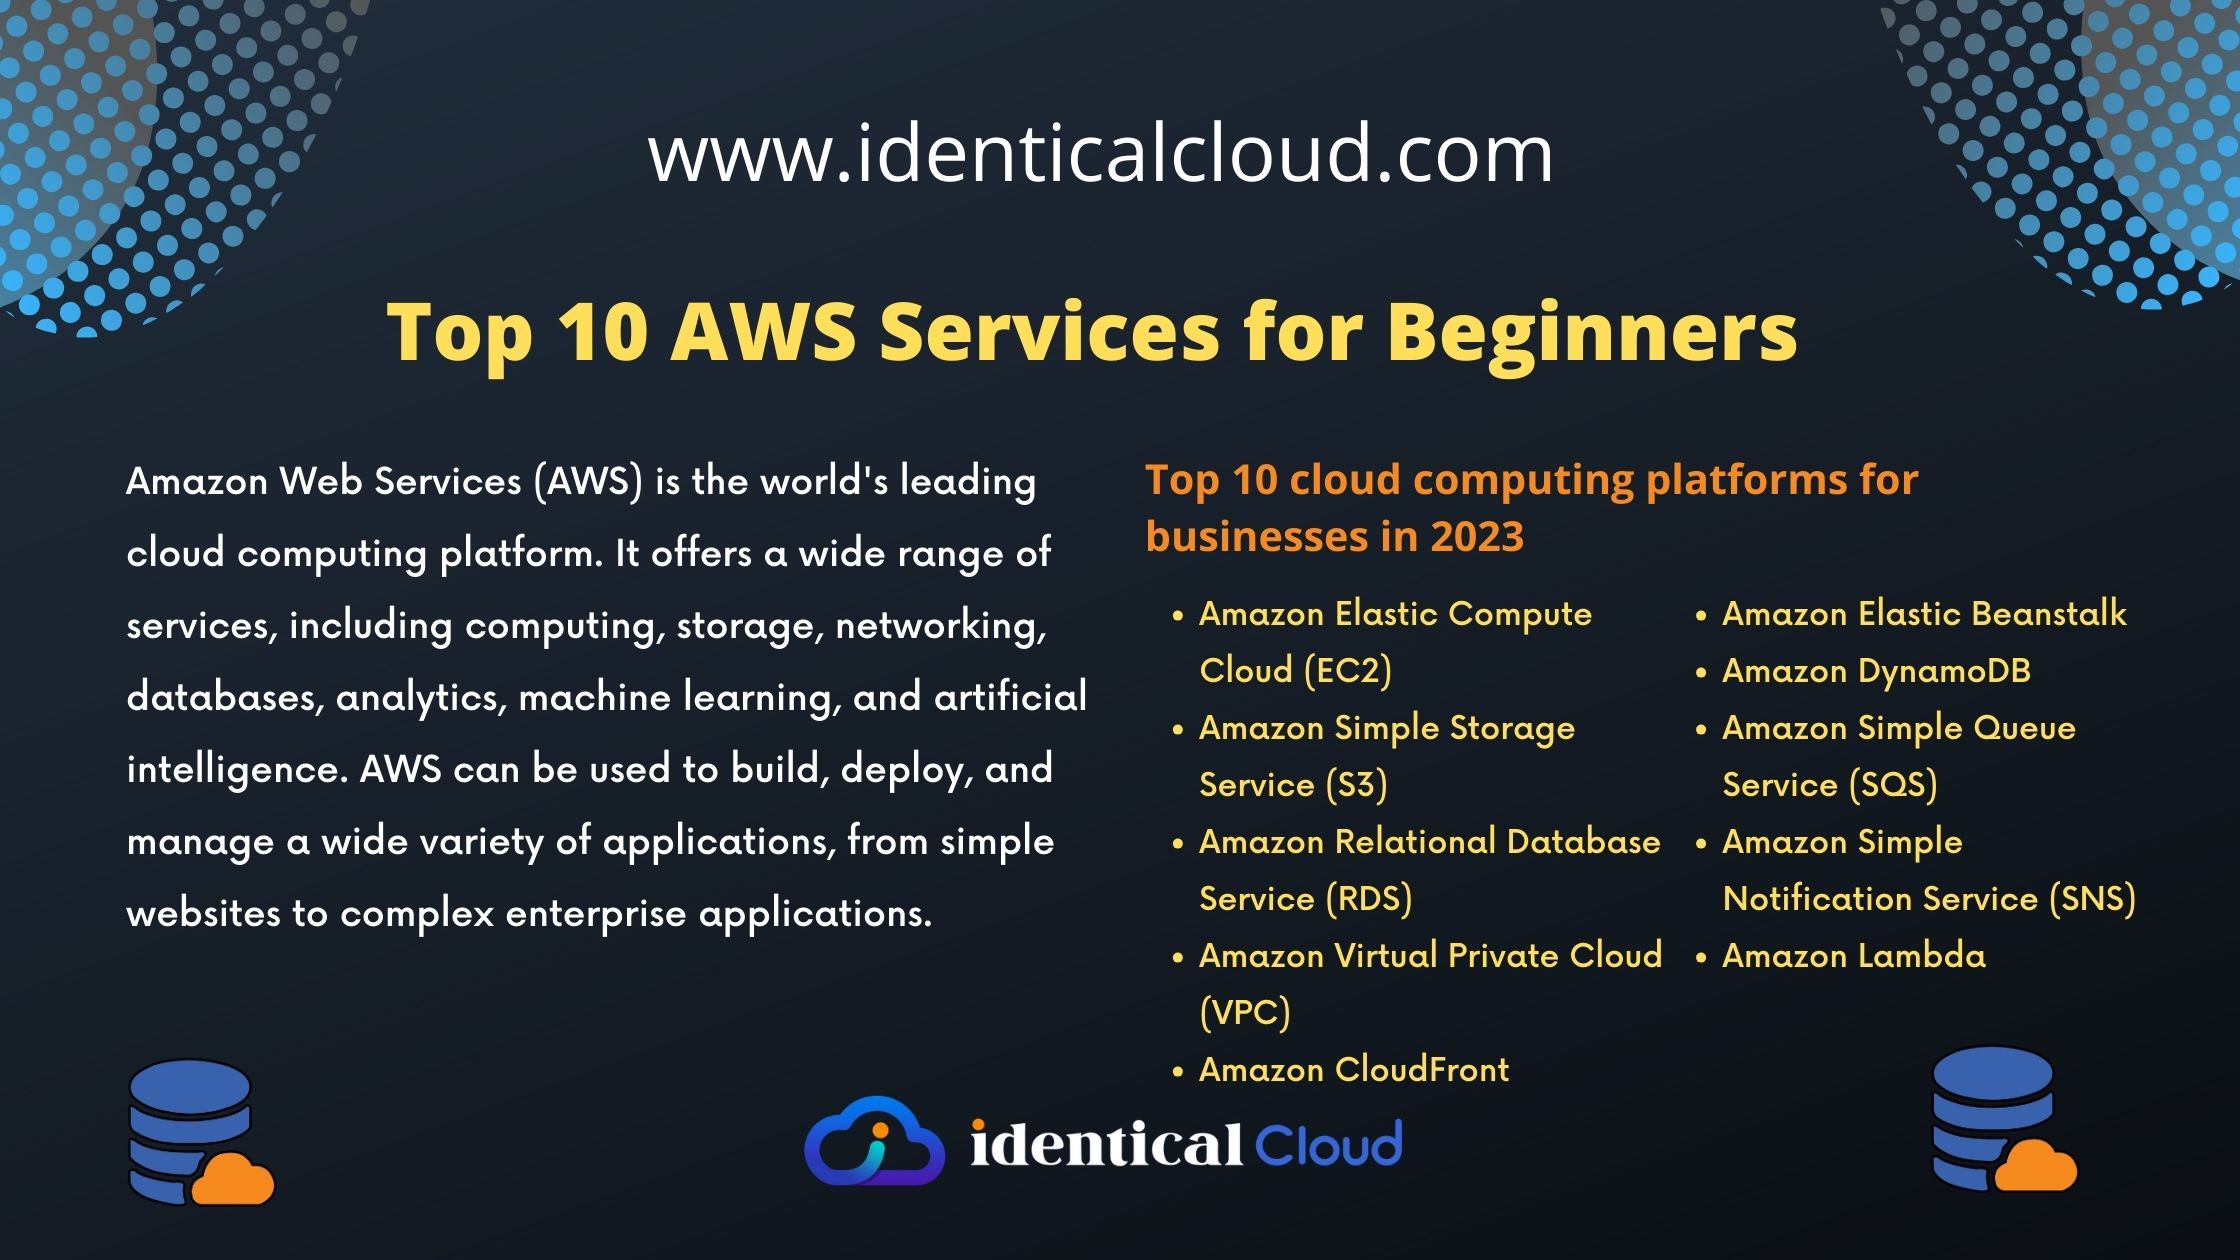 Top 10 AWS Services for Beginners - identicalcloud.com